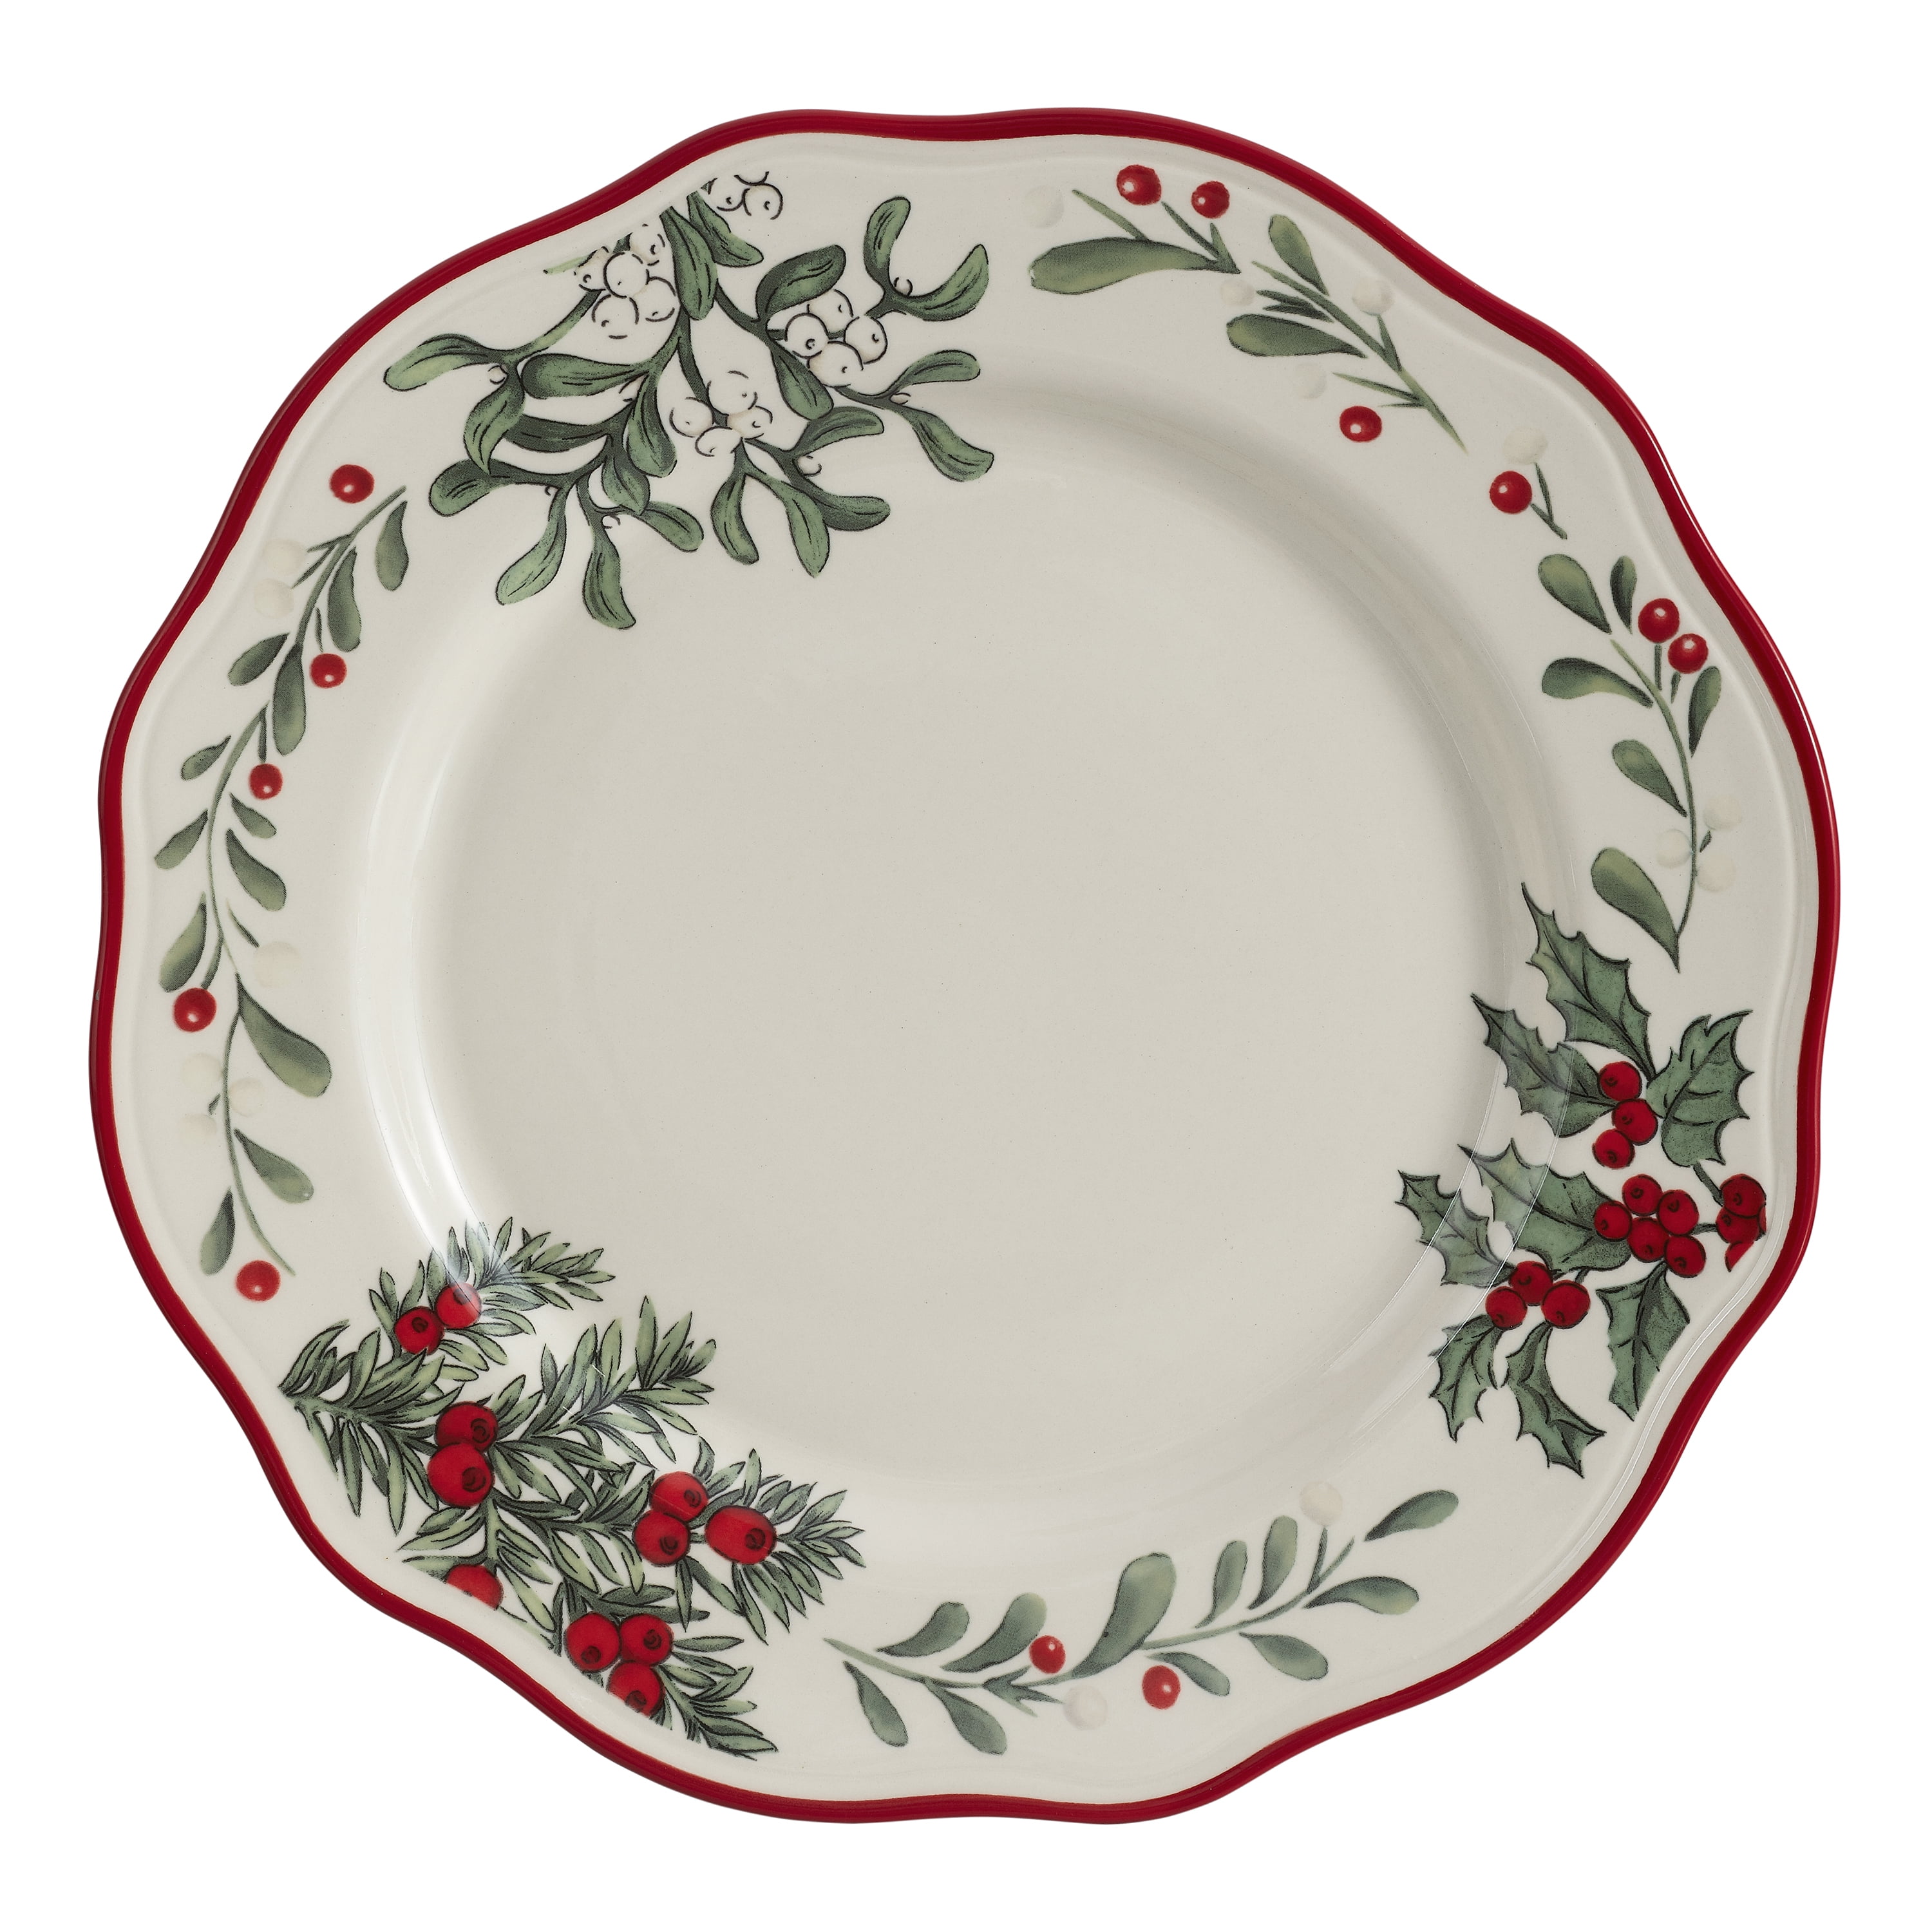 4 Better Homes and Garden Christmas Heritage Salad Plates Stag or Car or Tree 